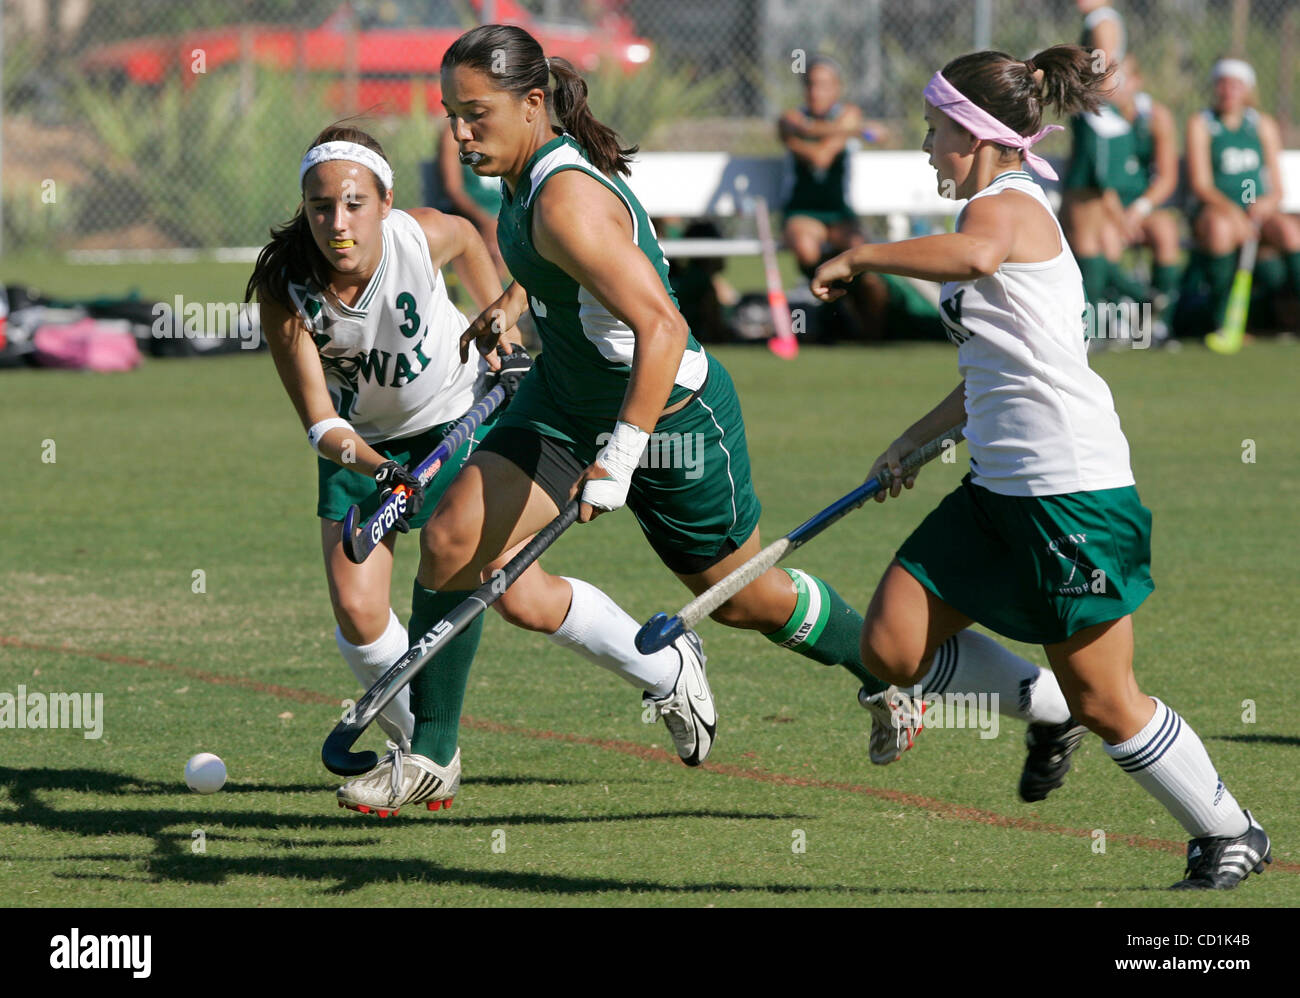 October 7, 2008, Poway, CA, USA Helix High School's field hockey team's victory at Poway High School, Helix High's star player TAYLOR WRIGHT moves the ball between Poway players DANNI BUDDE (cq), left, and DALENNA KESSLER, at right Credit: photo by Charlie Neuman, San Diego Union-Tribune/Zuma Press. Stock Photo